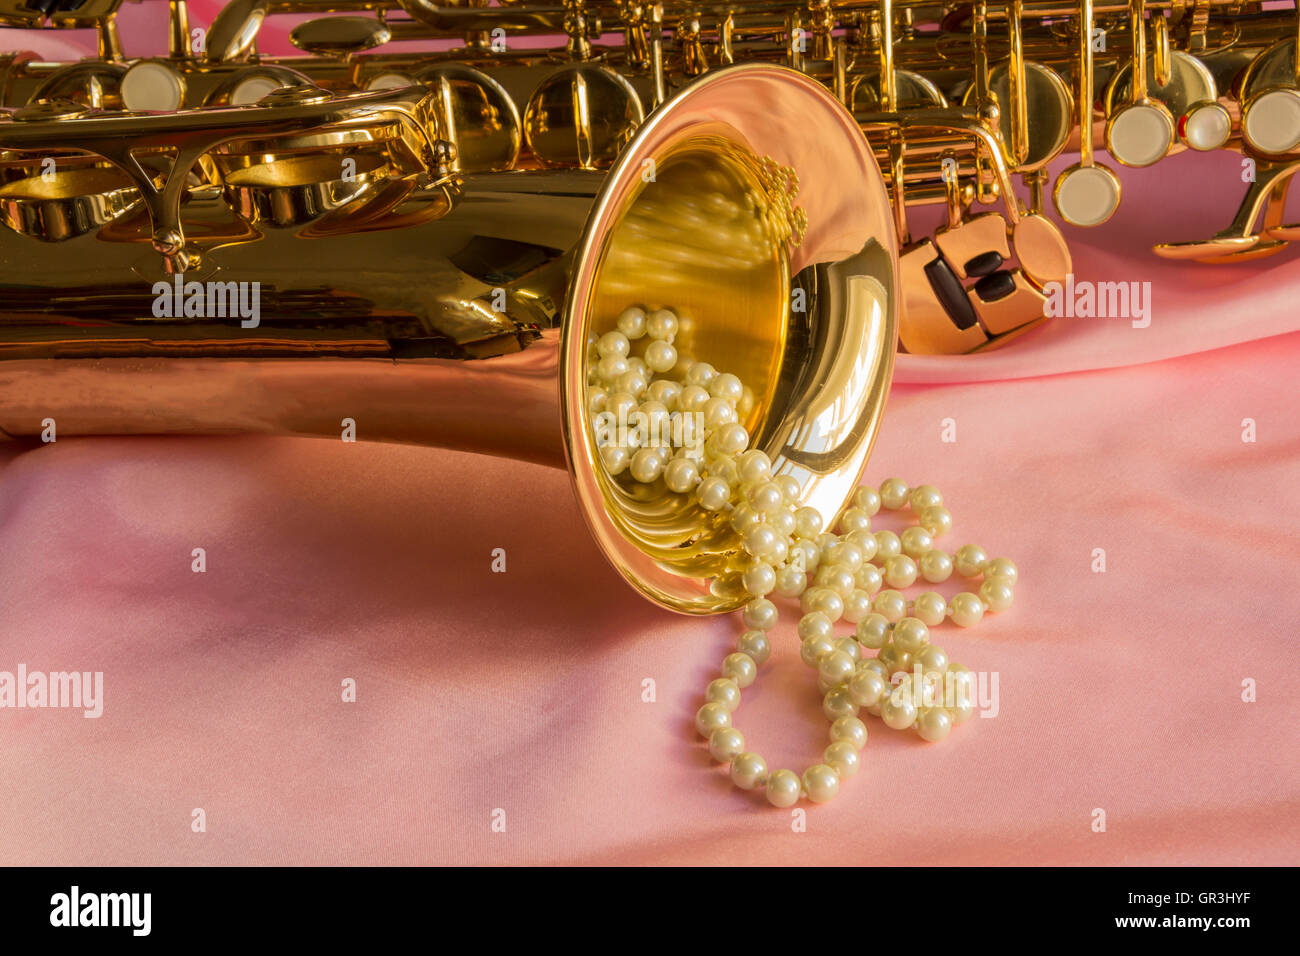 Saxophone and Pearl necklace on Pink silk Stock Photo